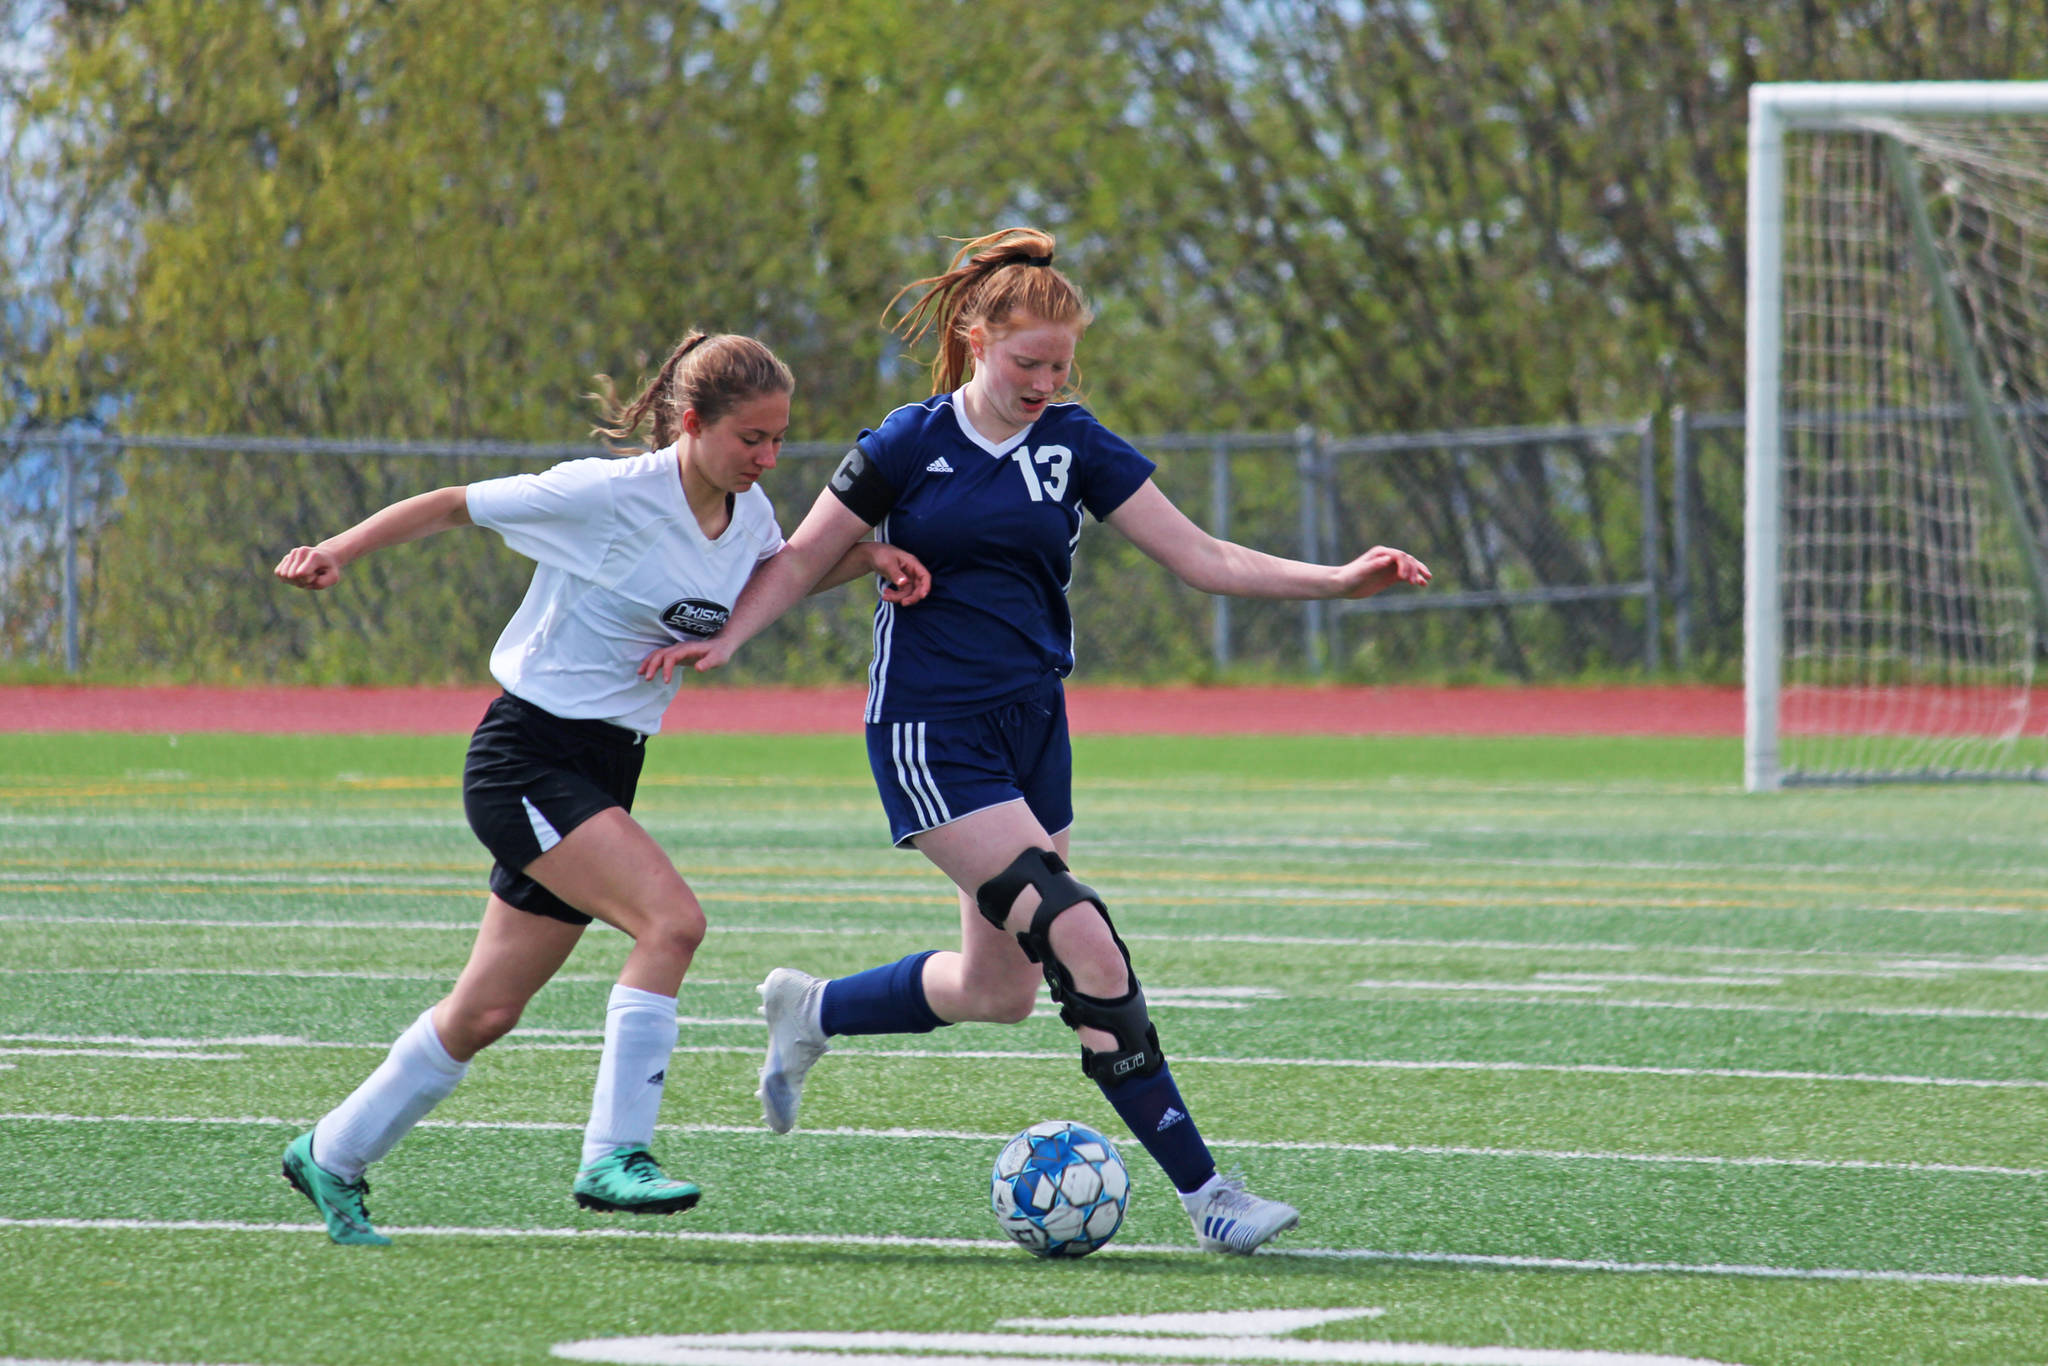 Nikiski’s America Jeffreys tries to snag the ball from Soldotna’s Kianna Holland during a game Friday, May 17, 2019 during the Peninsula Conference Soccer Tournament at Homer High School in Homer, Alaska. Soldotna advanced to the championship game on Saturday with an 11-0 win over Nikiski. (Photo by Megan Pacer/Homer News)